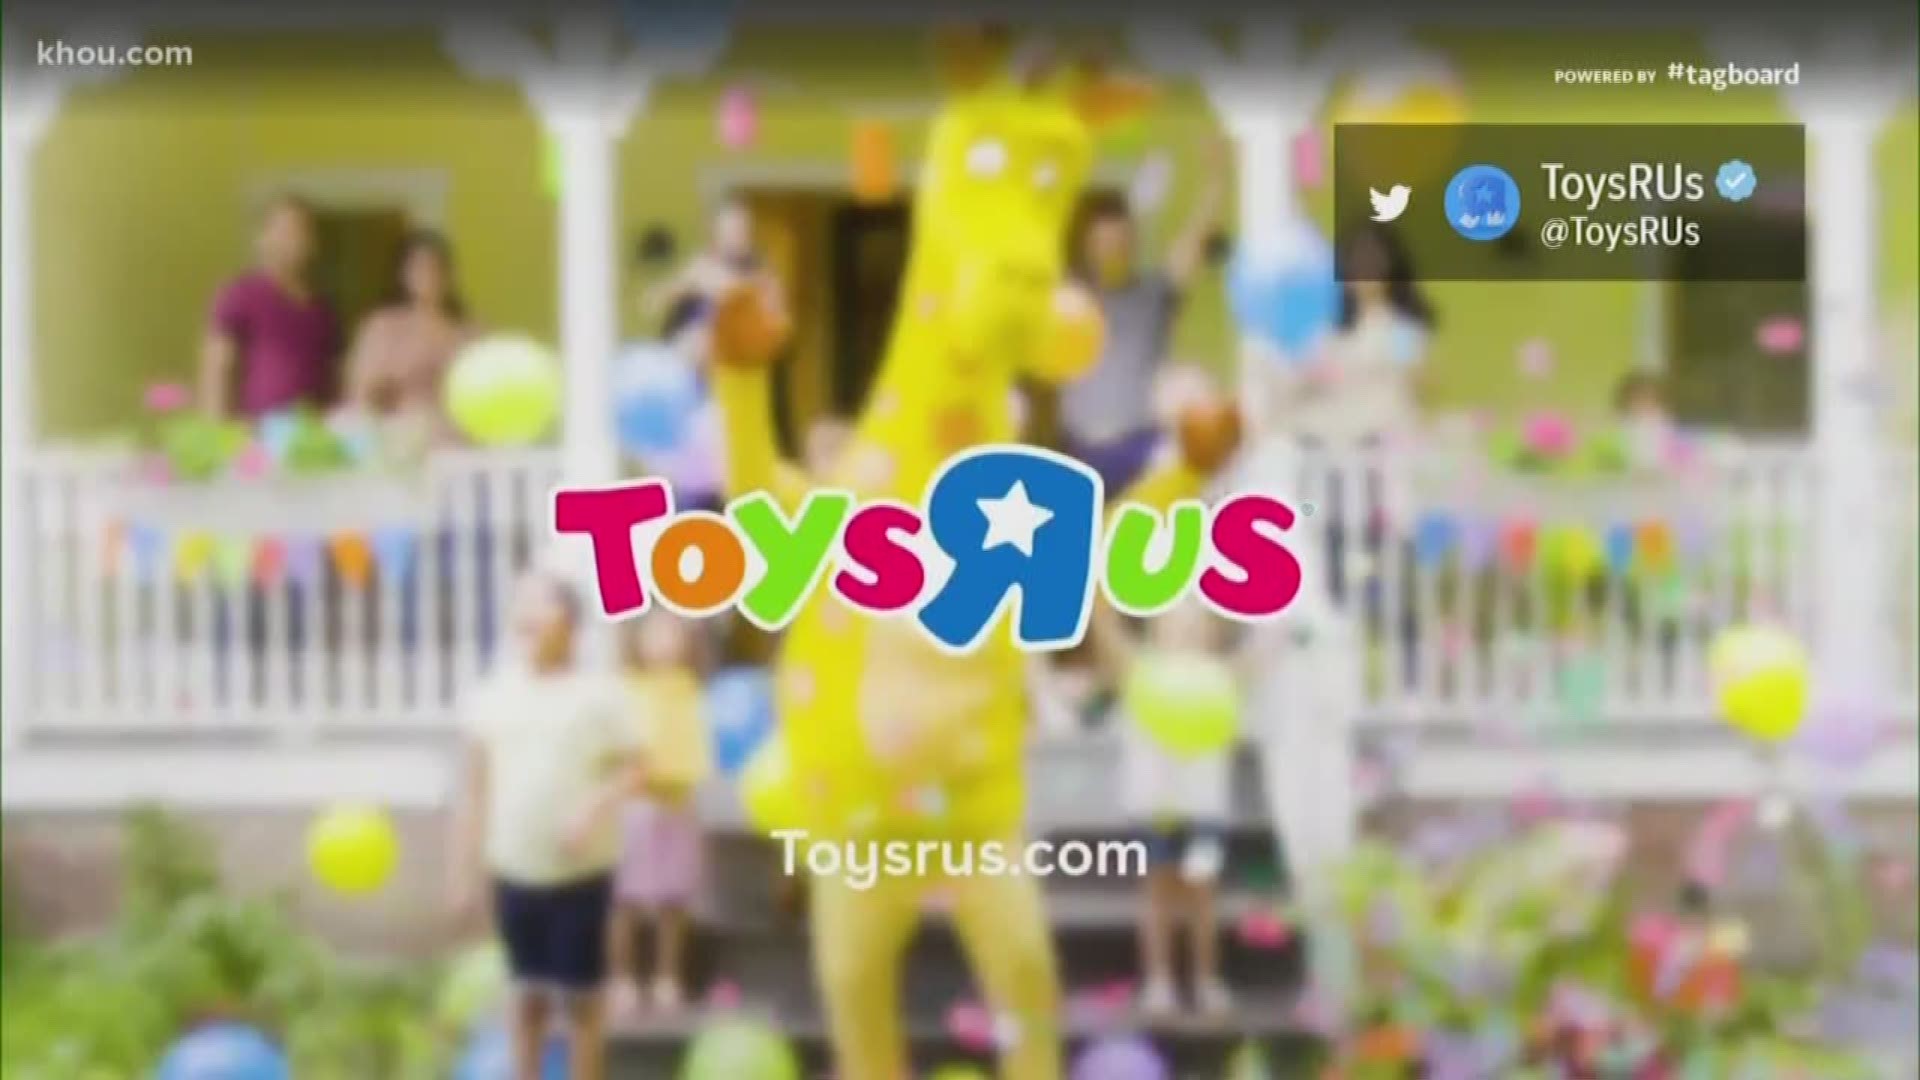 Toys R Us is making its way back to Houston, specifically to the Galleria. The store concept will be smaller and immersive with kids able to test out toys in store before parents make a purchase.